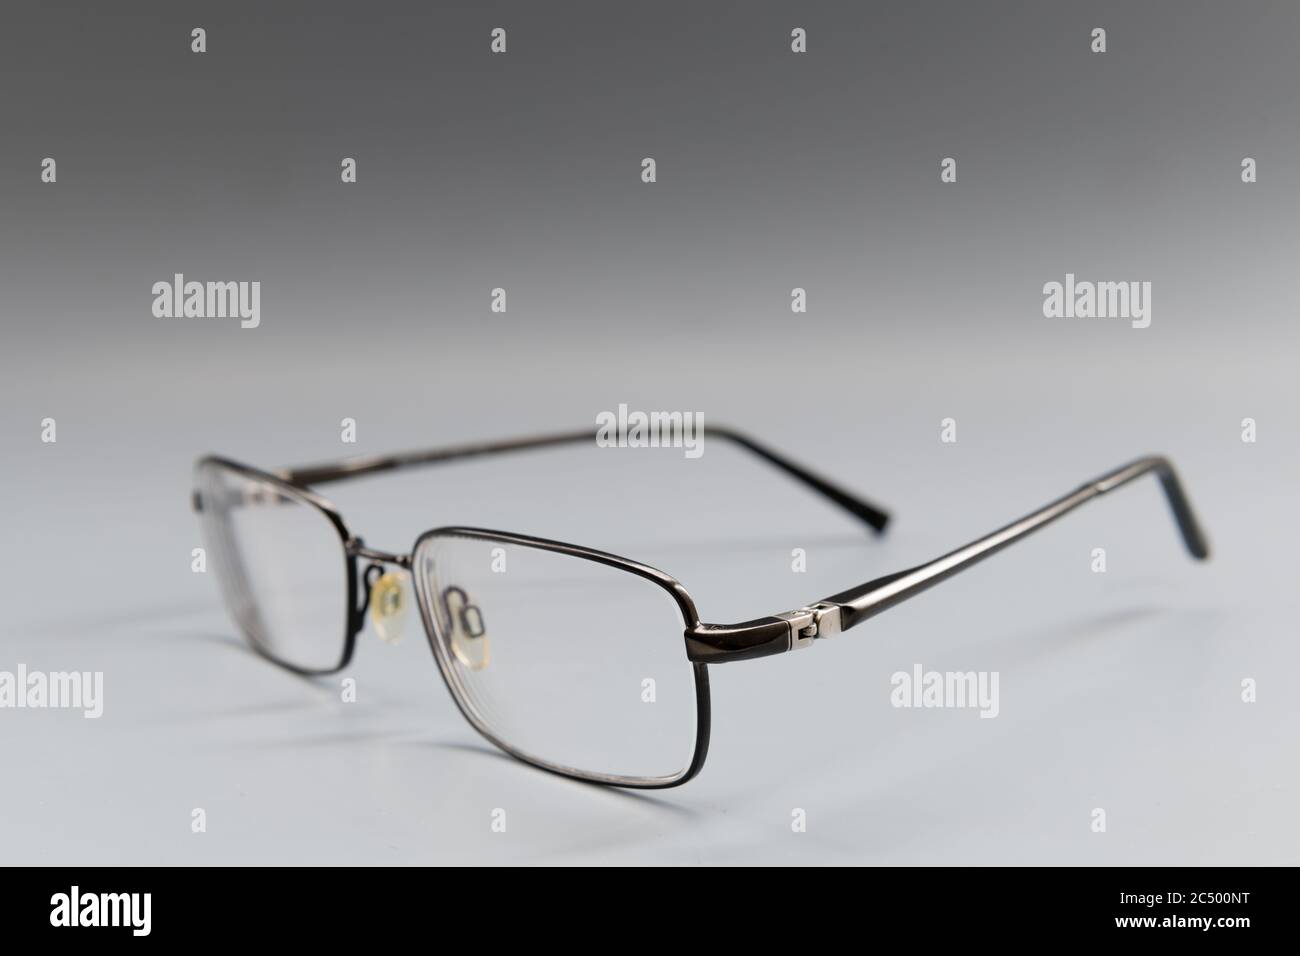 A pair of metal frame prescription eye glasses isolated with a grey background. Stock Photo